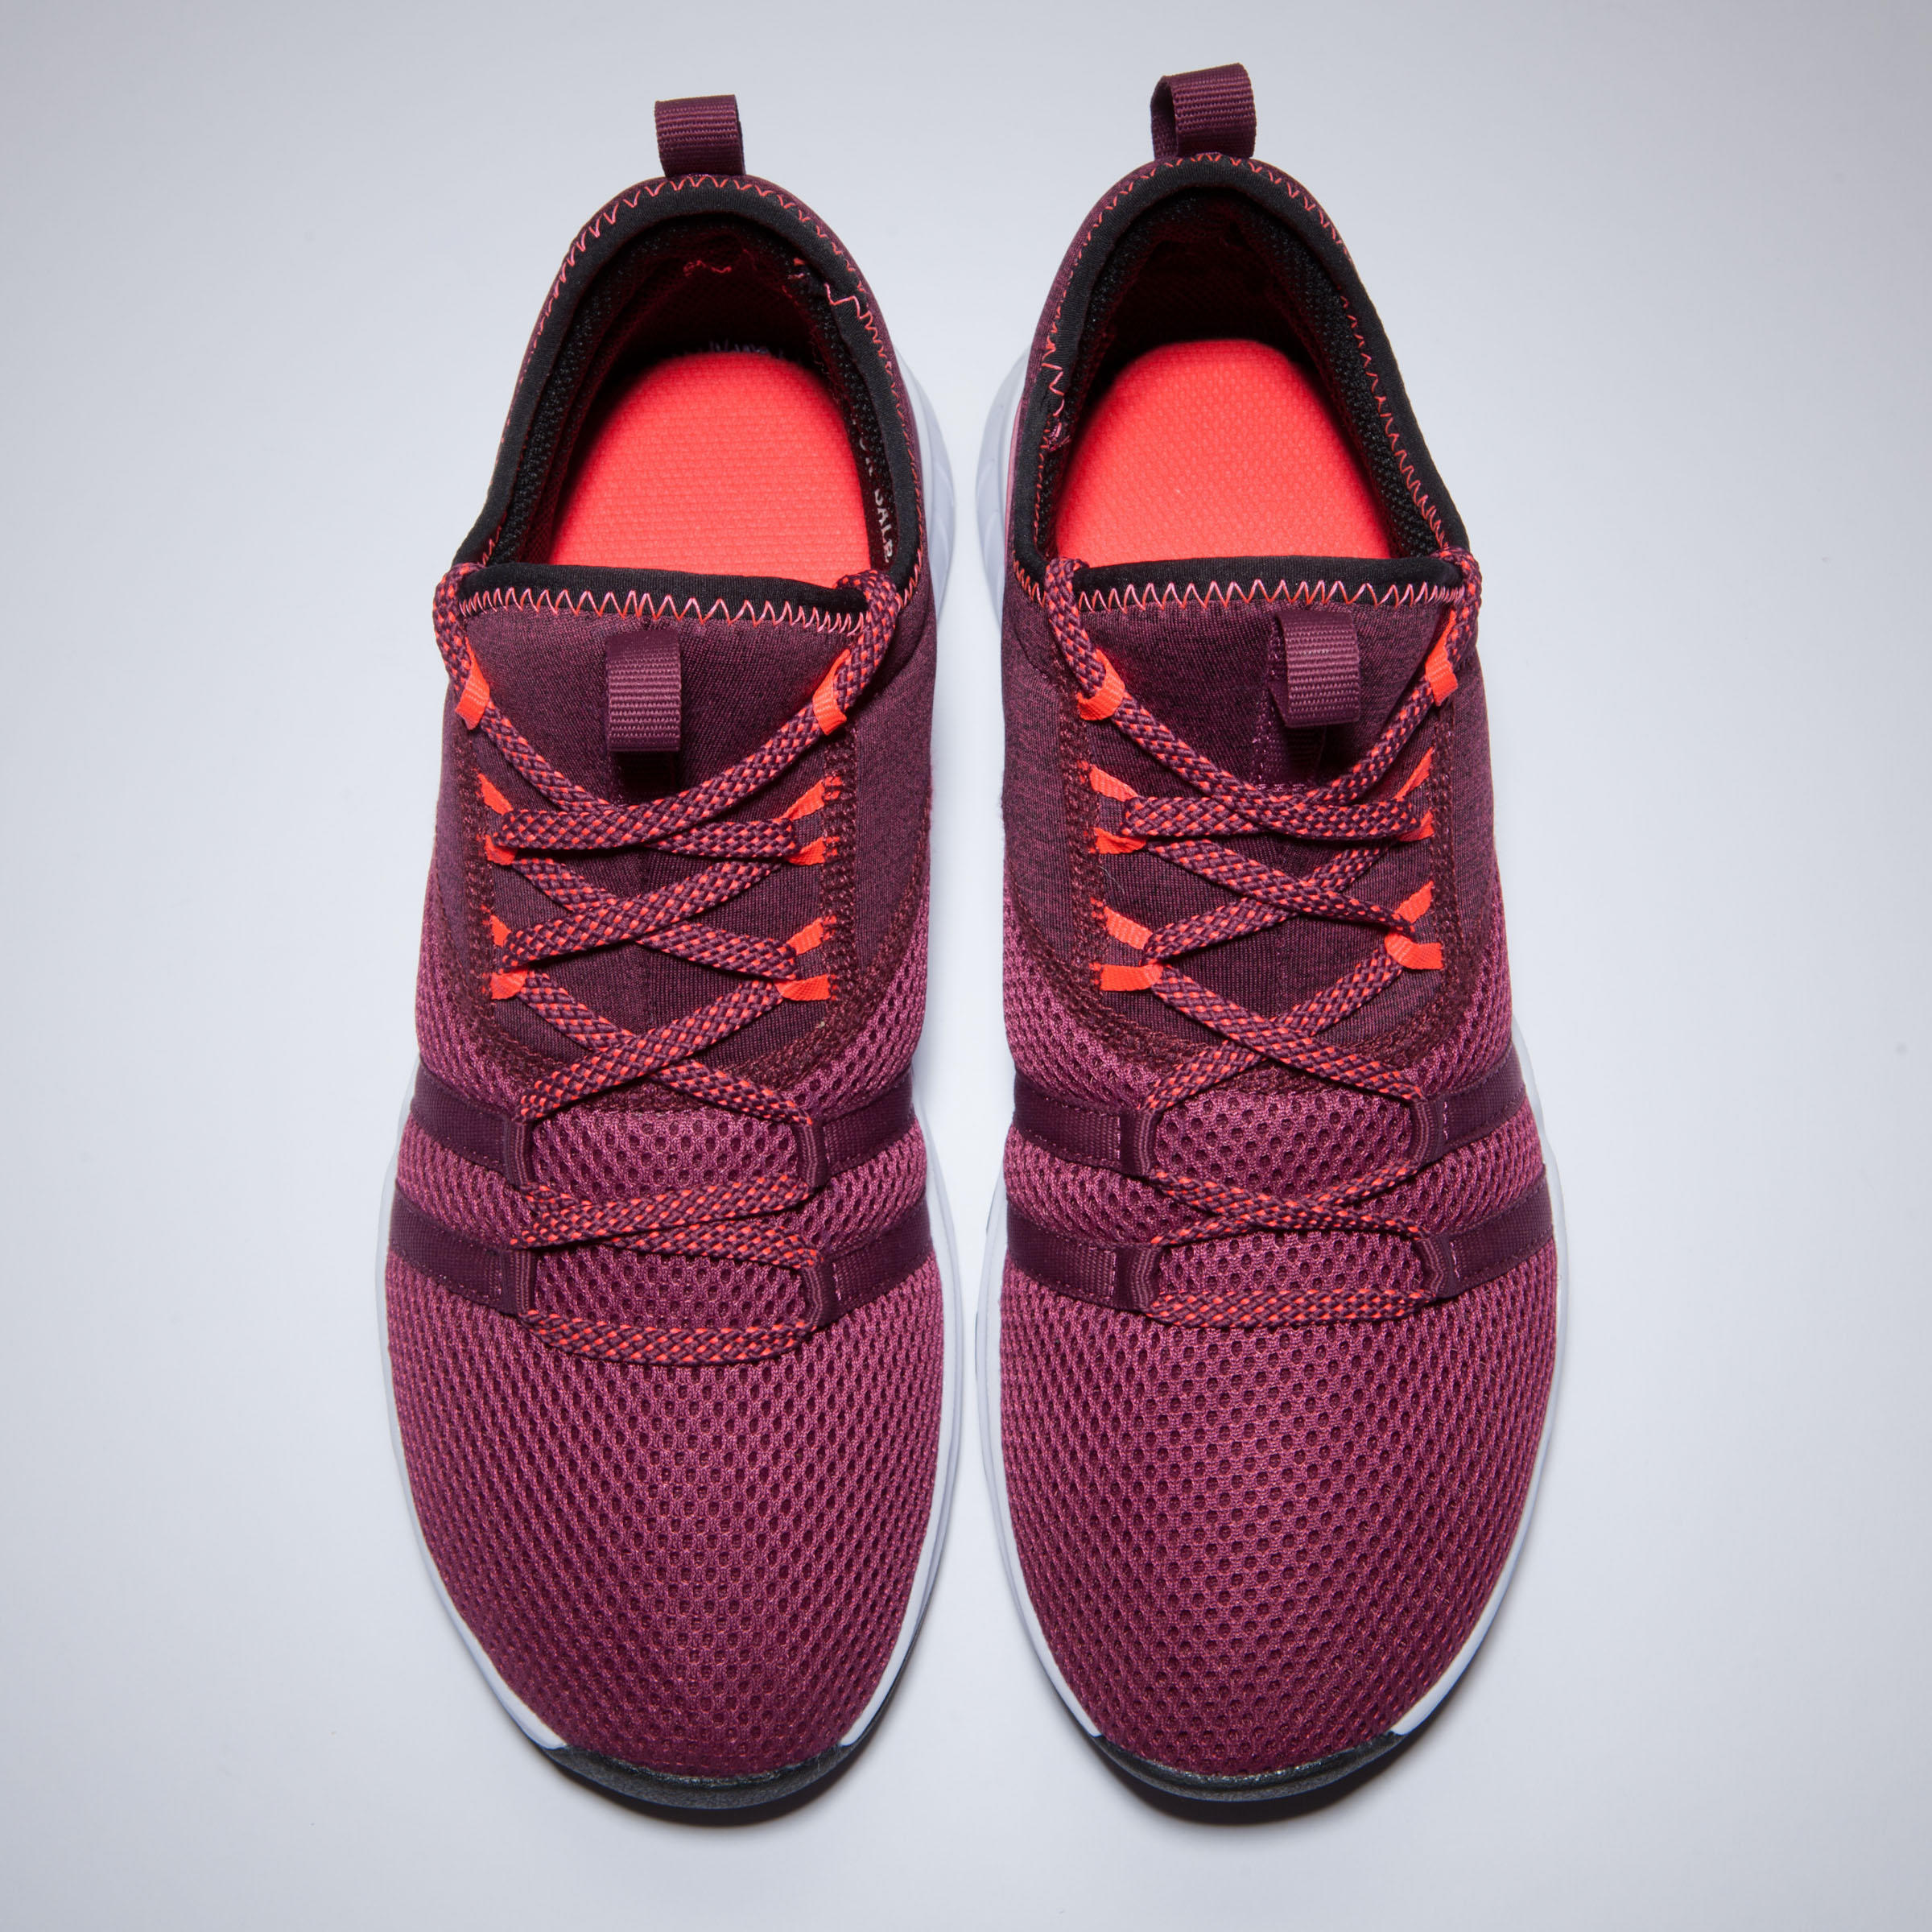 Women's Fitness Shoes 120 Mid - Burgundy 8/16